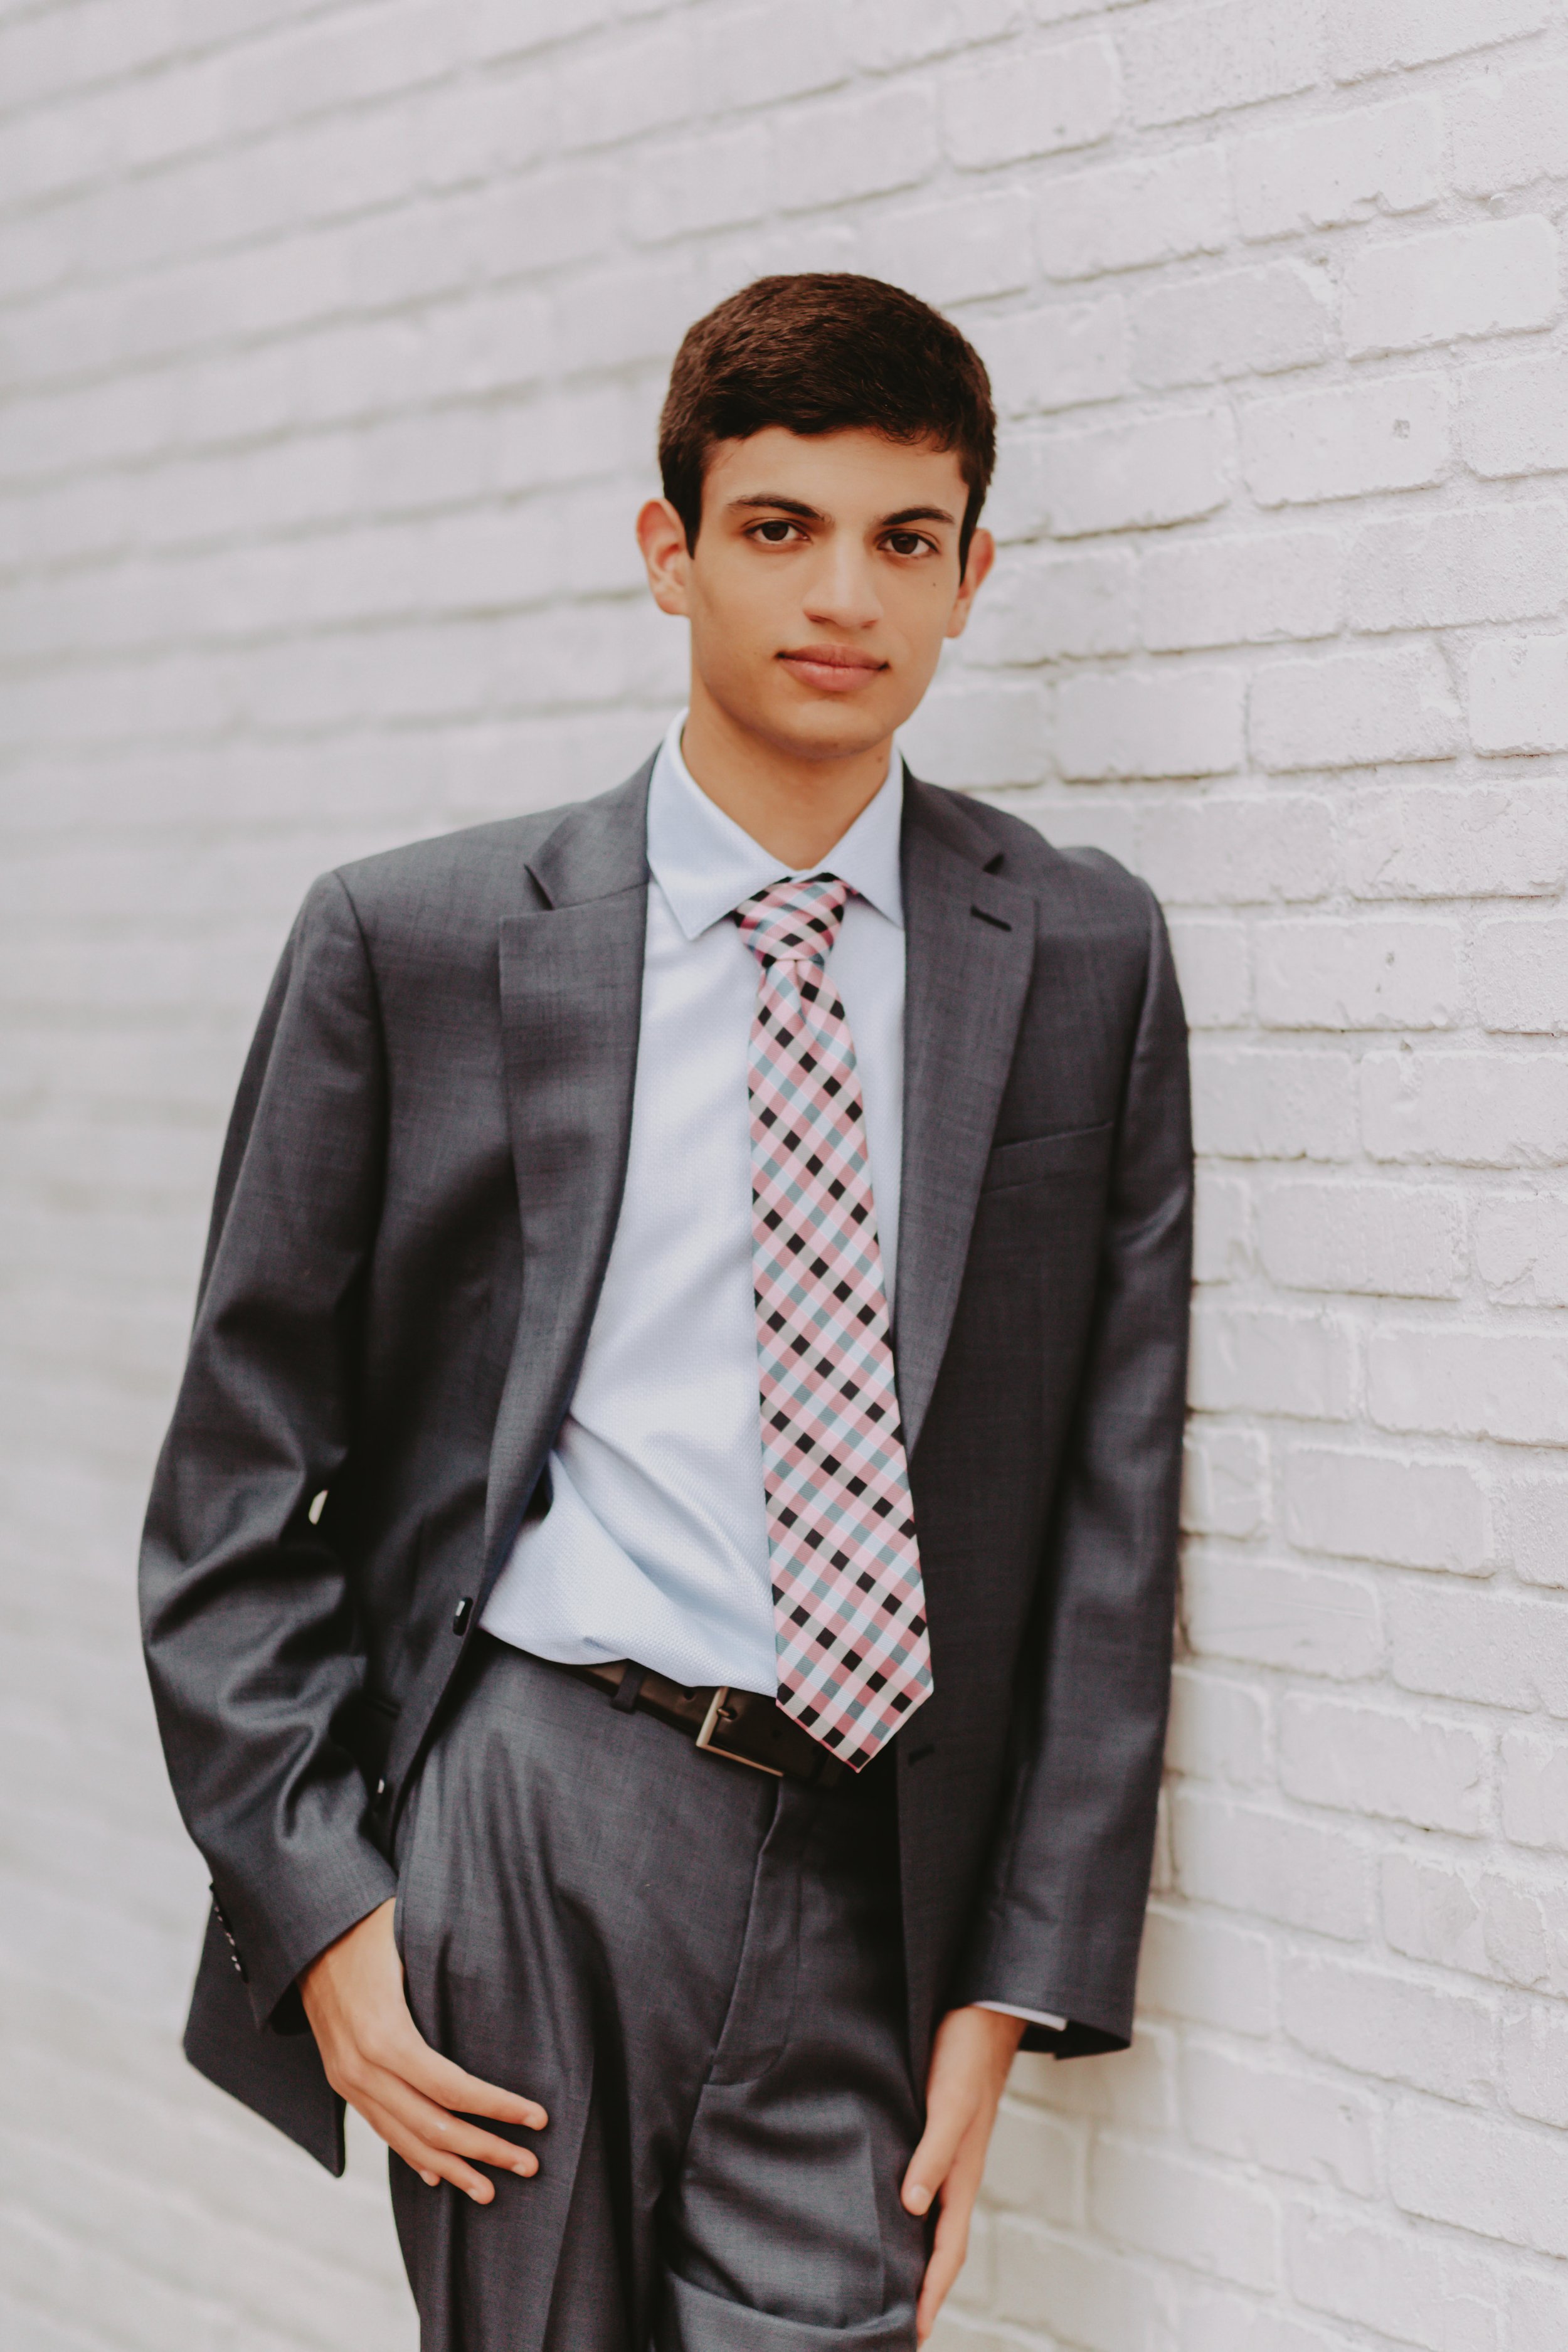  formal guy senior photo outfits 